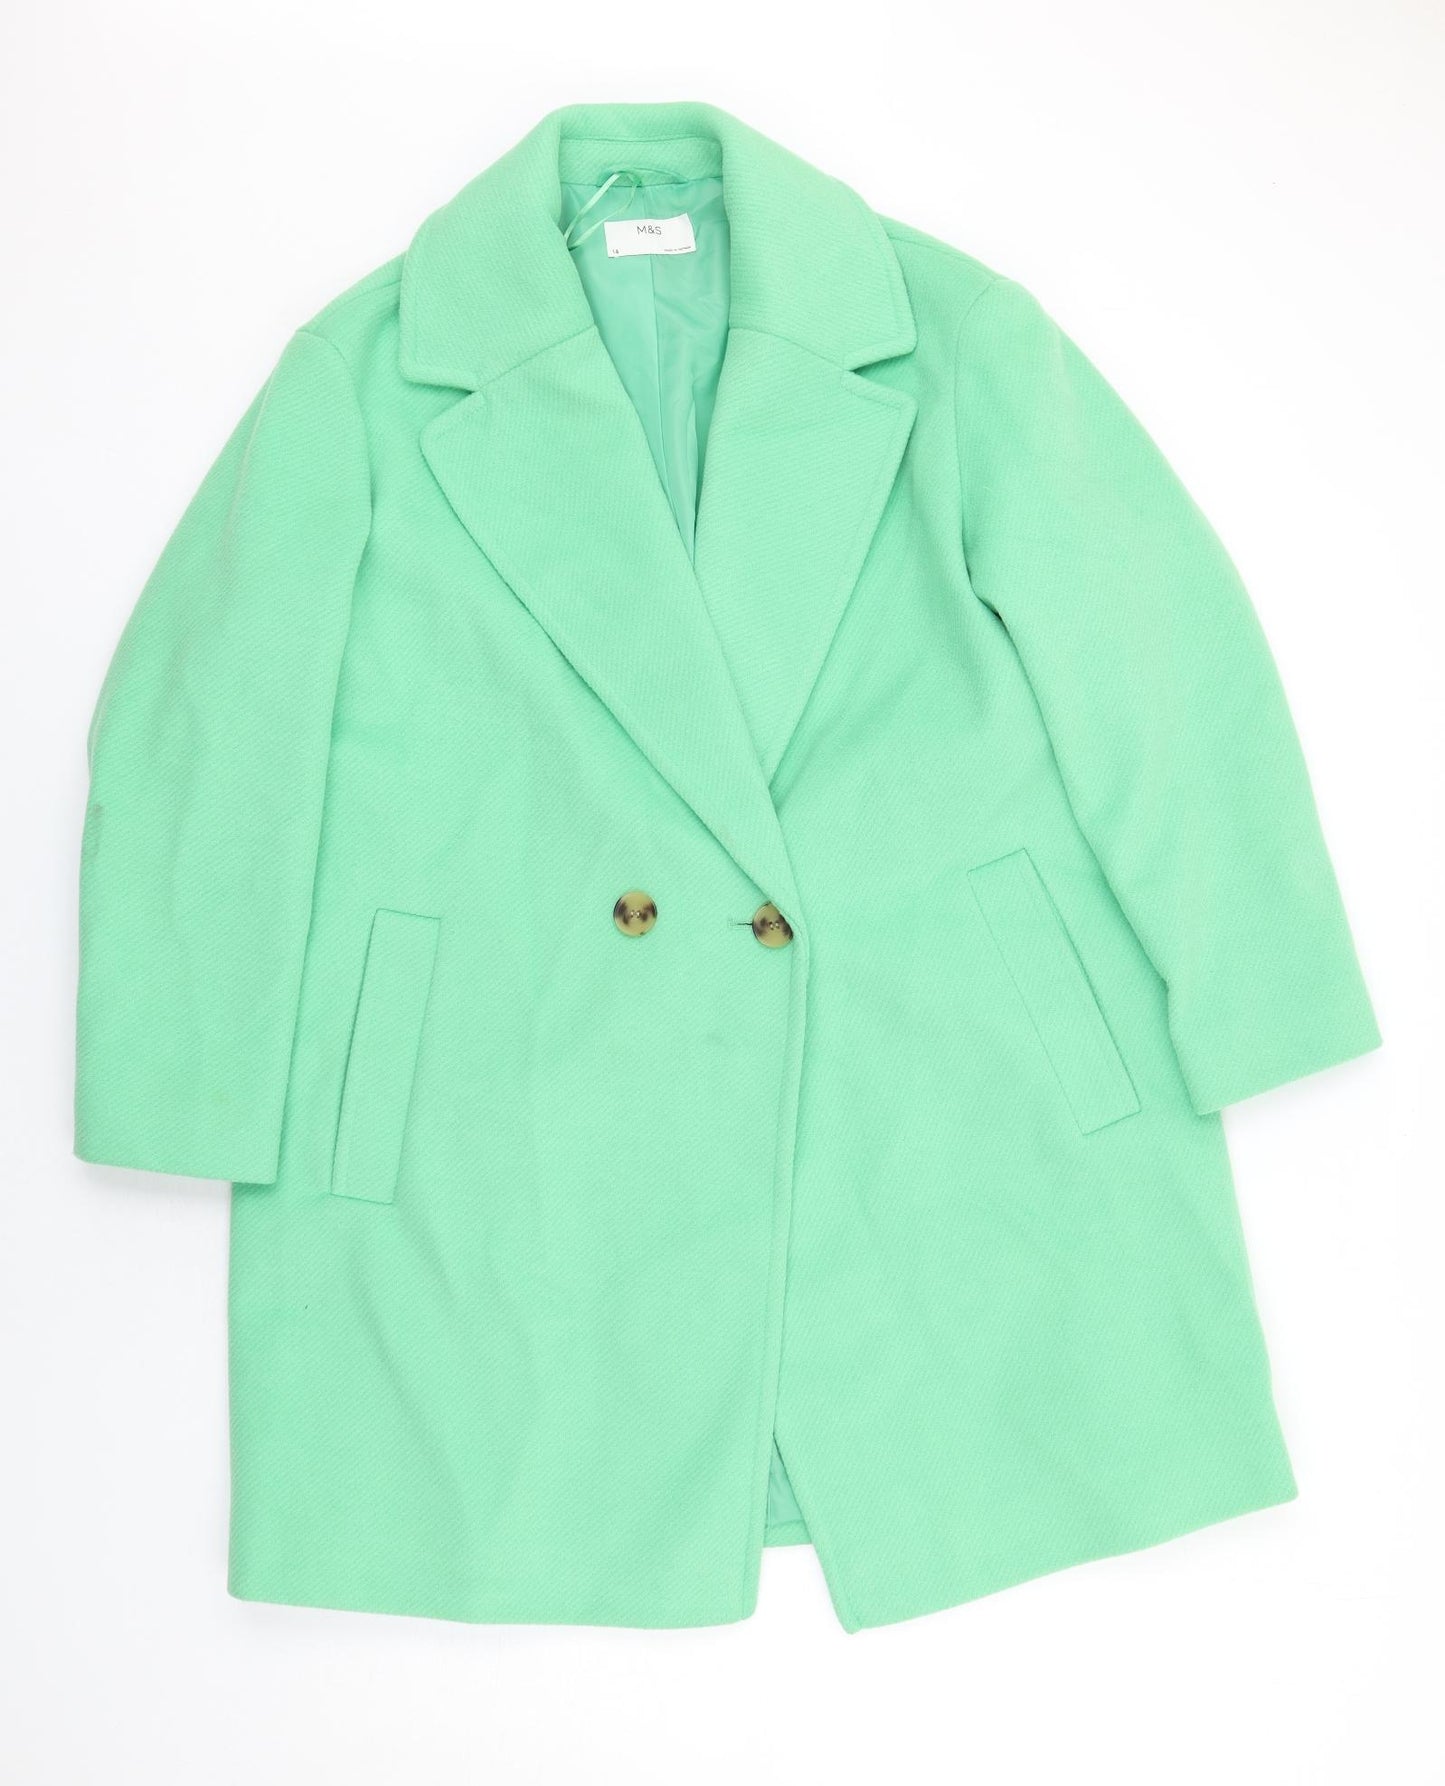 Marks and Spencer Womens Green Jacket Blazer Size 14 Button